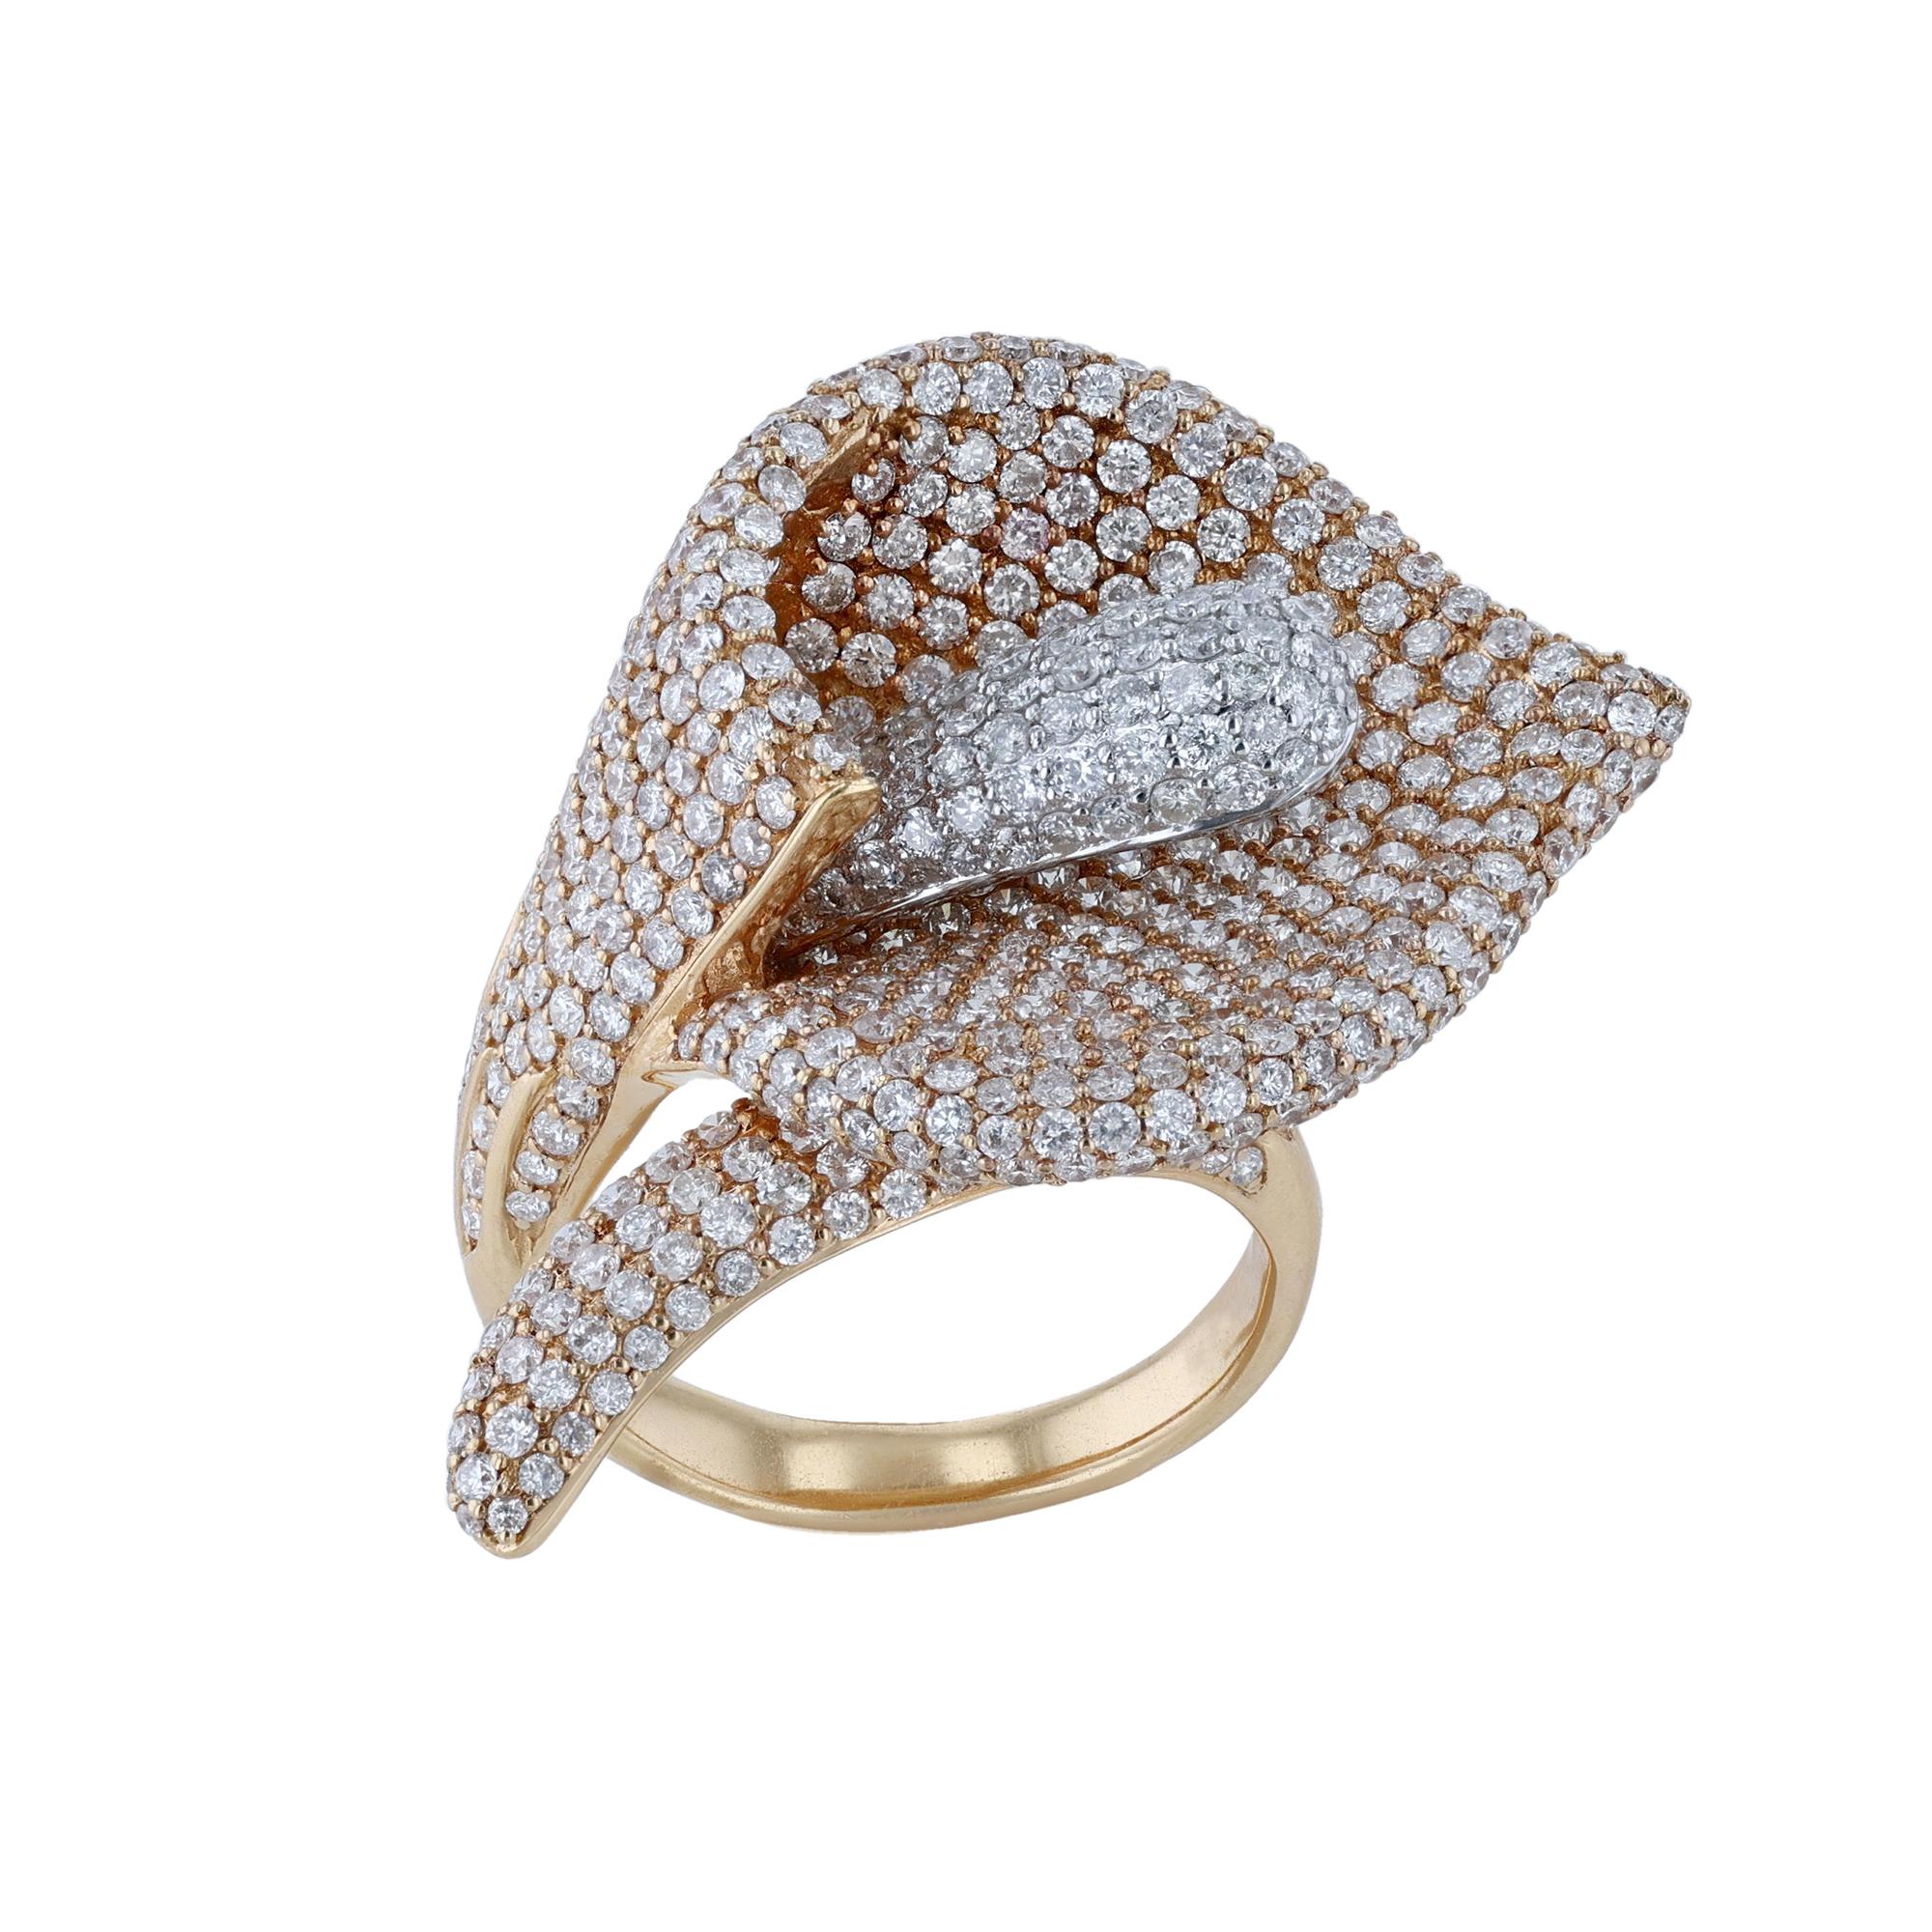 This ring is made in 18K rose and white gold and features wrapped Calla Lily. Made out of 614 pave' set, round cut diamonds weighing 5.50 carats. With a color grade (H) and clarity grade (SI2). 